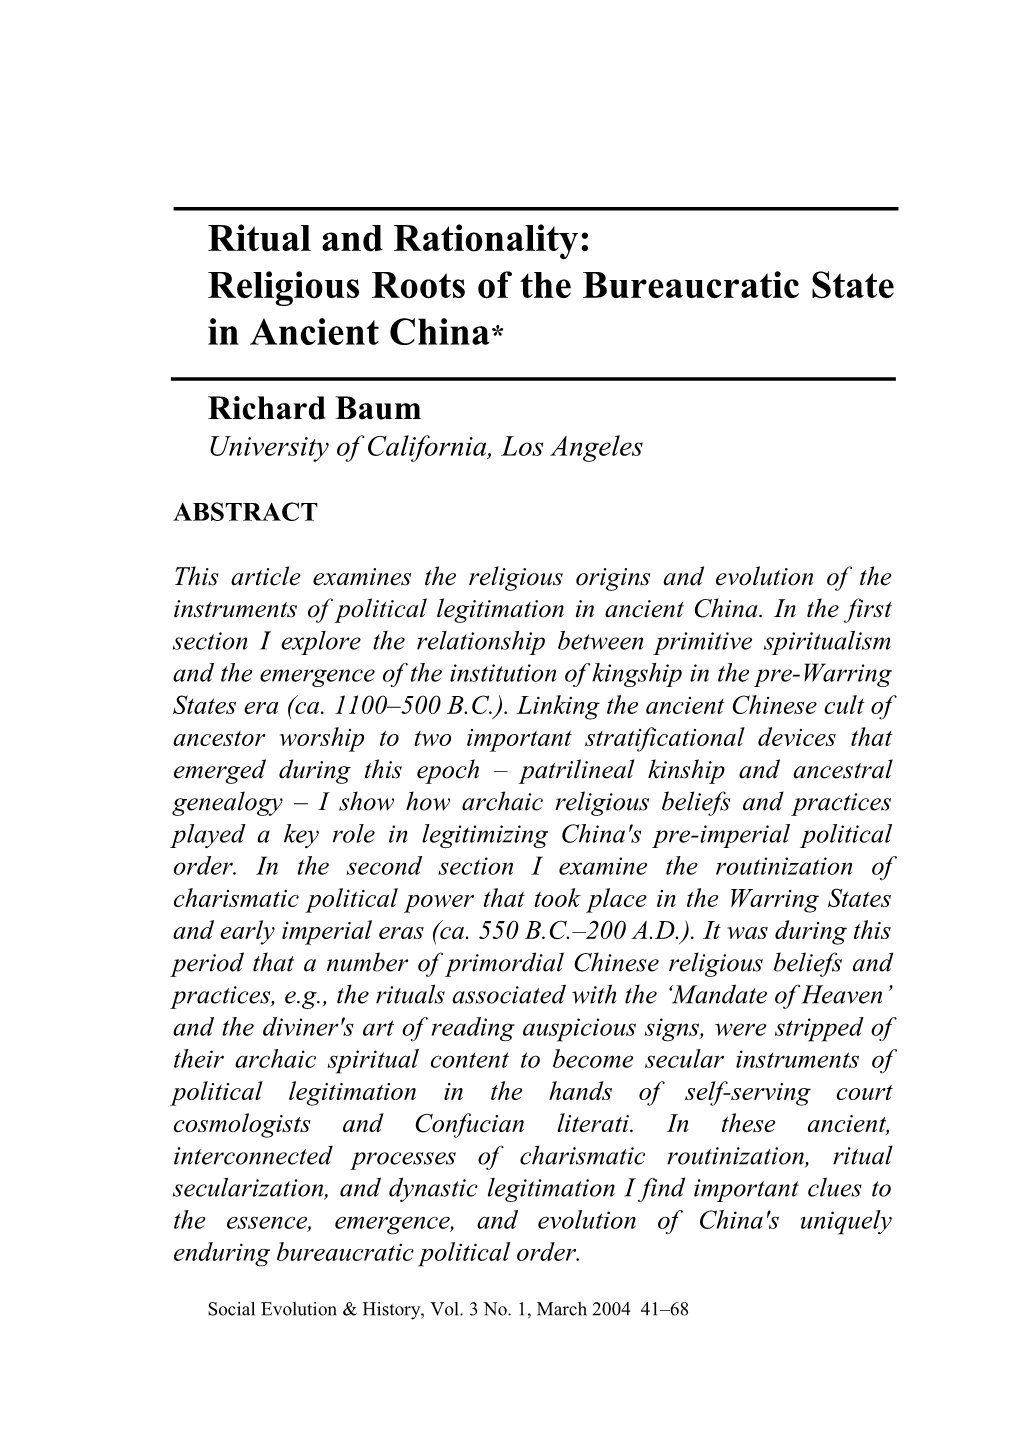 Baum / Ritual and Rationality: Religious Roots 1